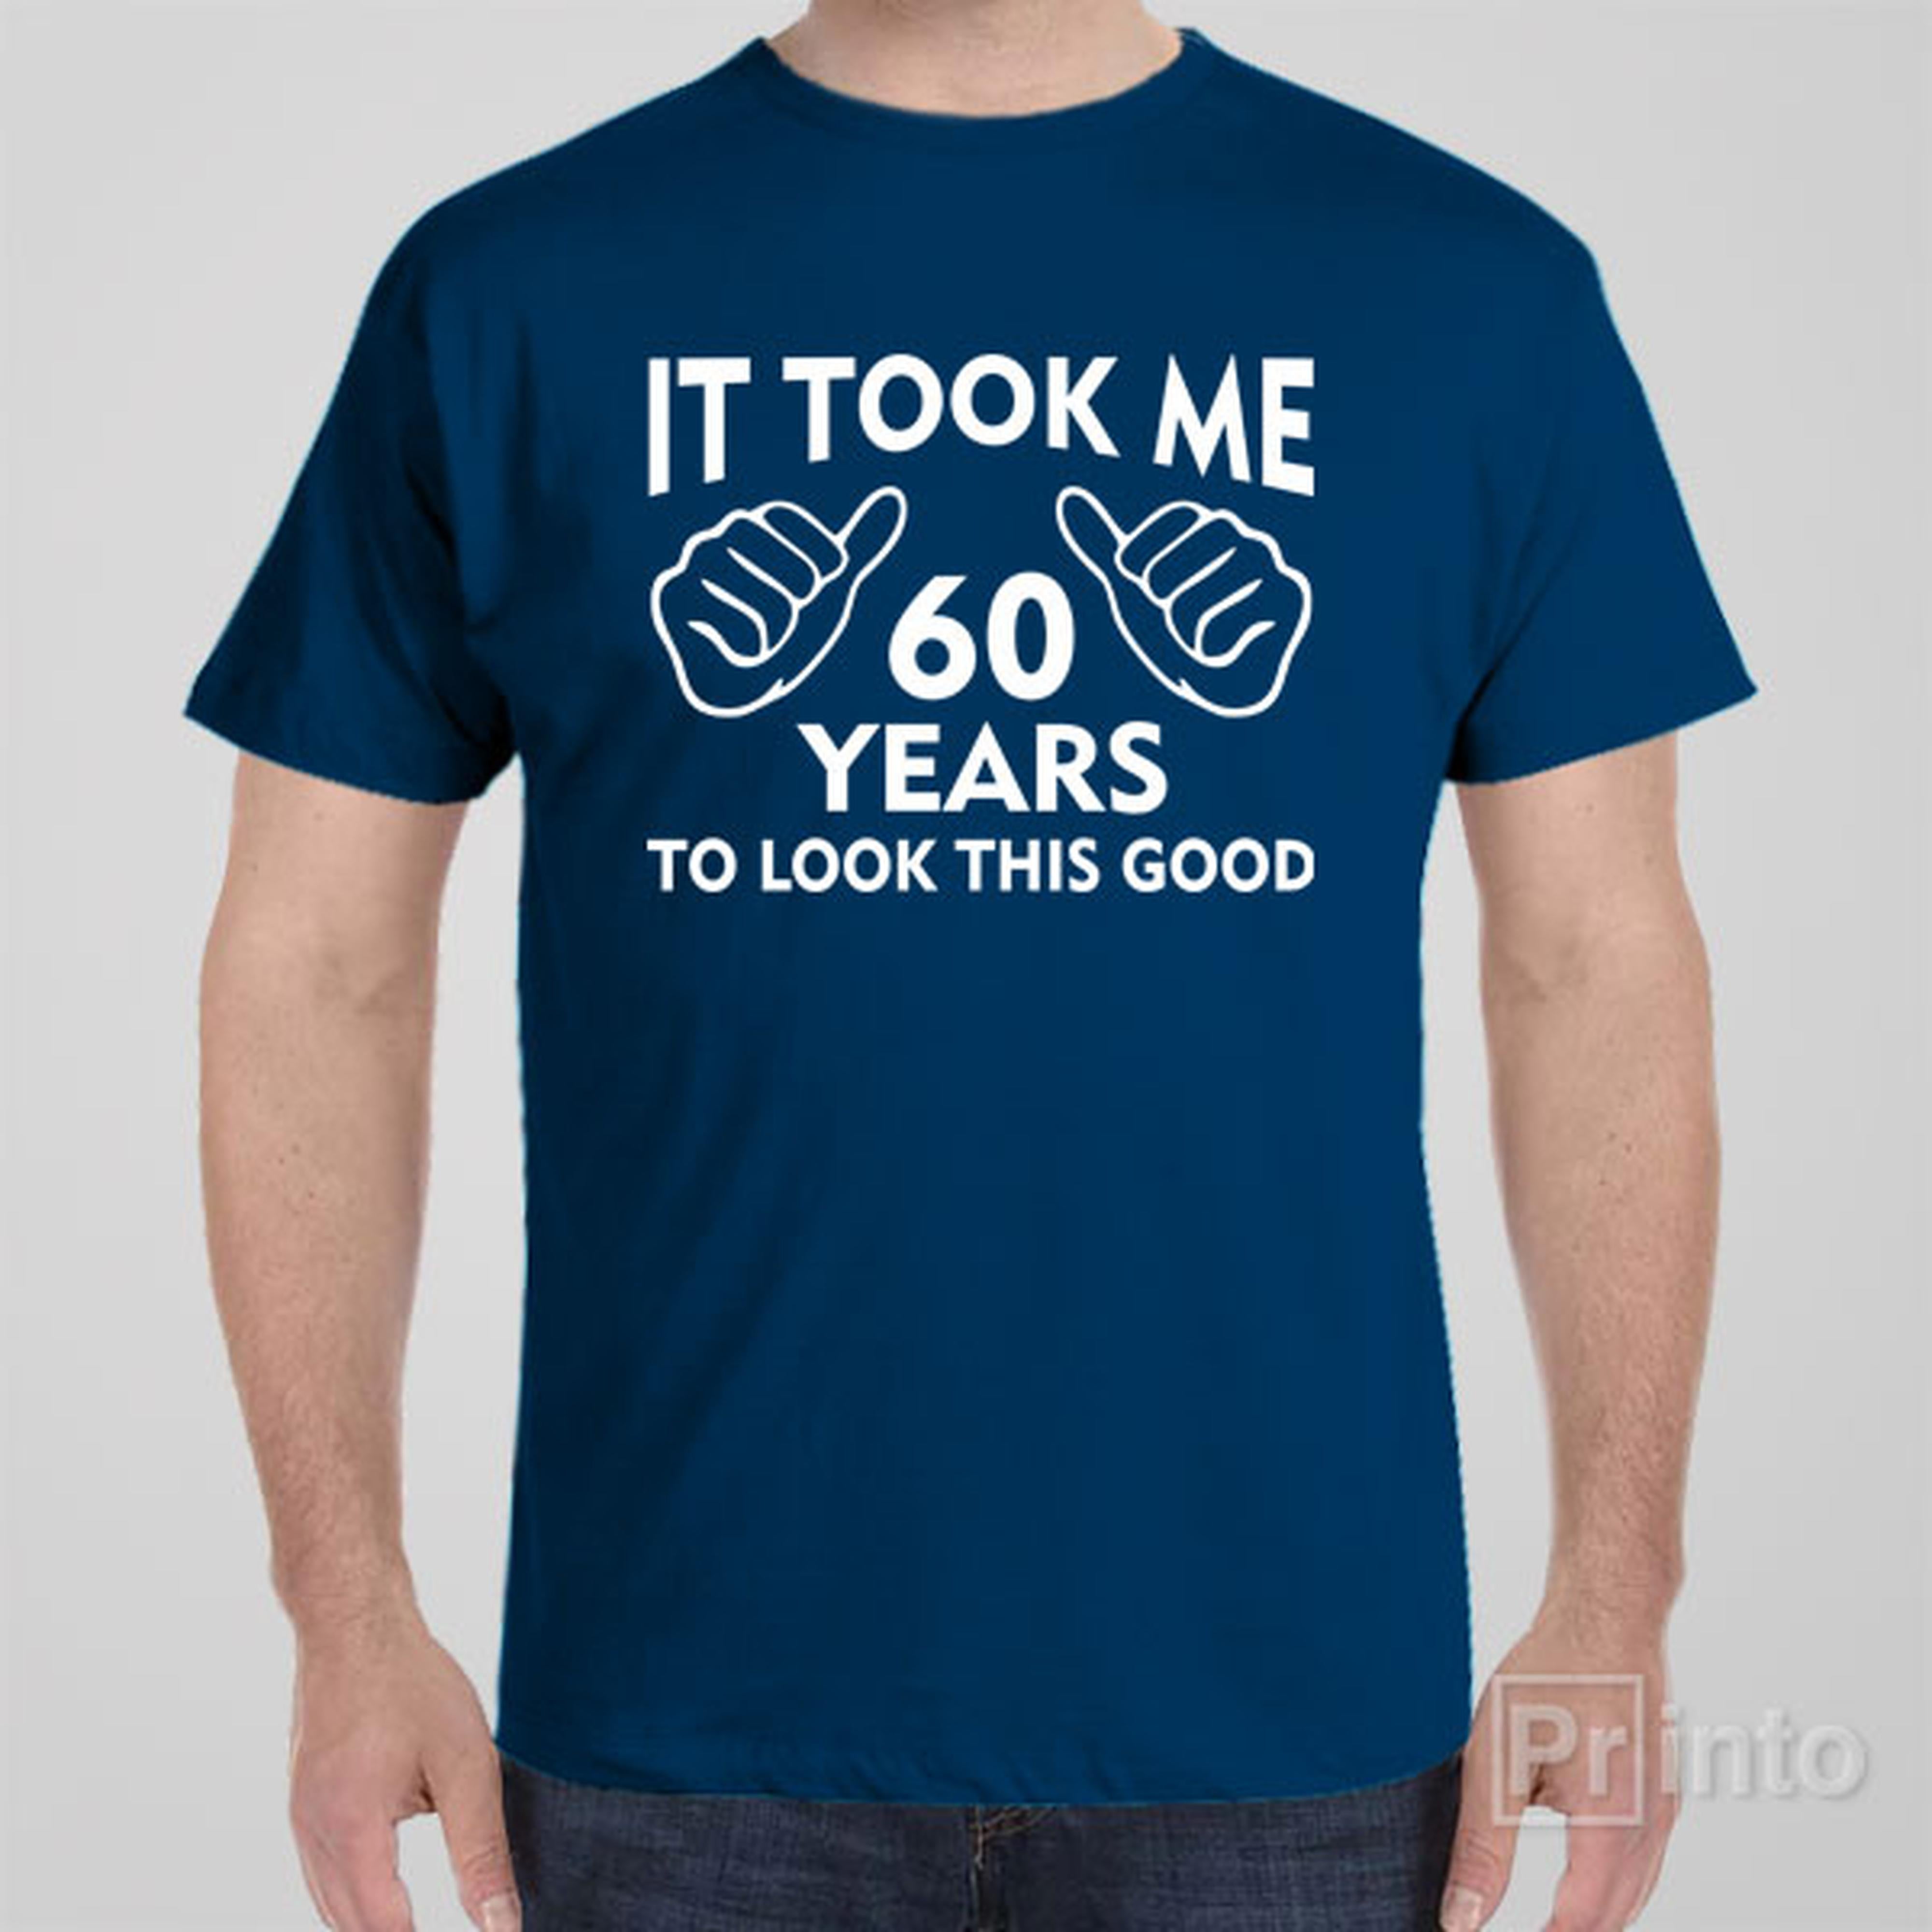 it-took-me-60-years-to-look-this-good-t-shirt